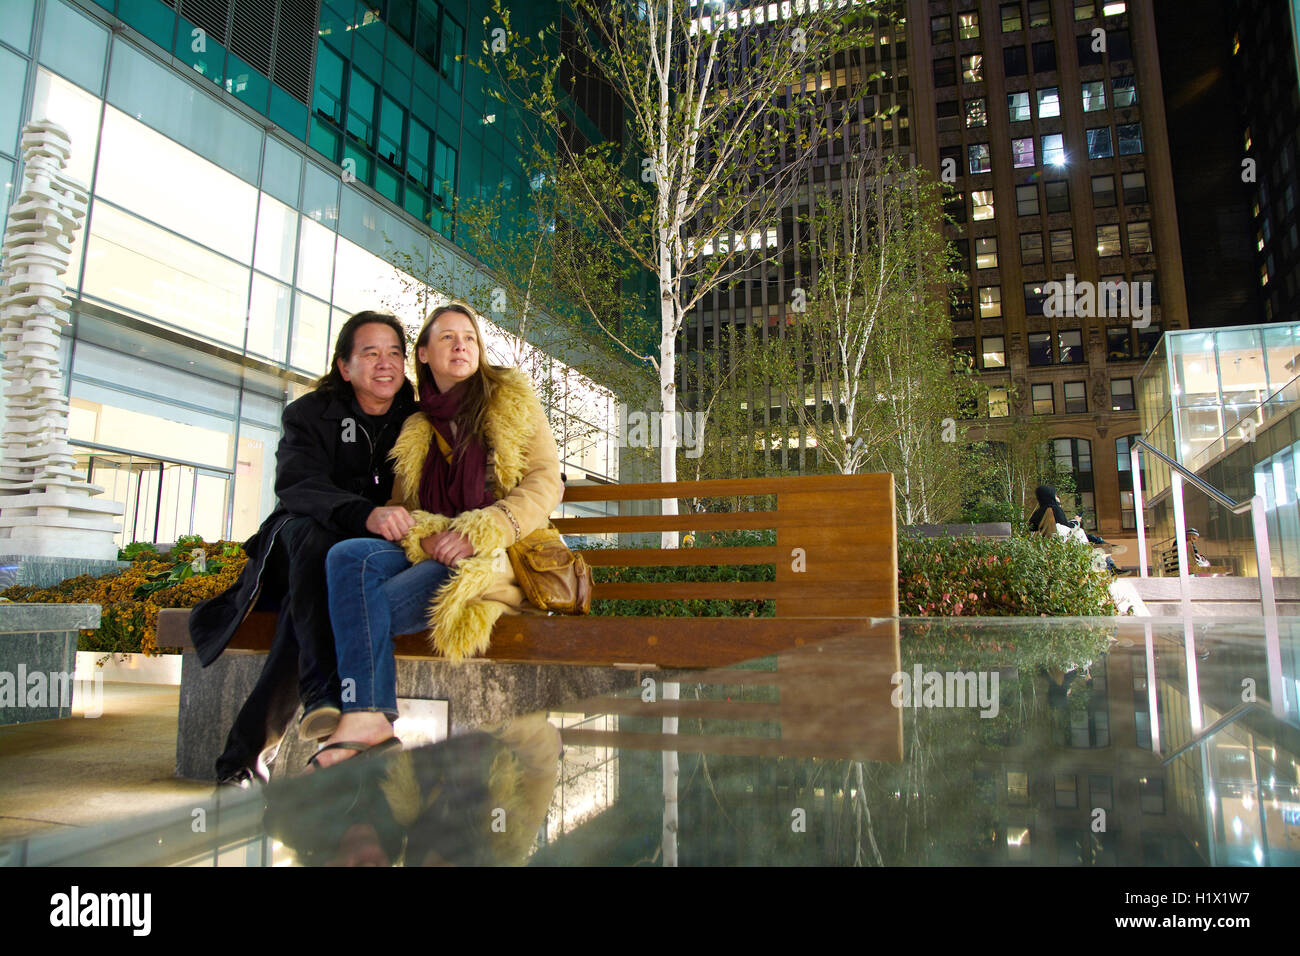 photography - hi-res and bench Alamy images stock Manhattan